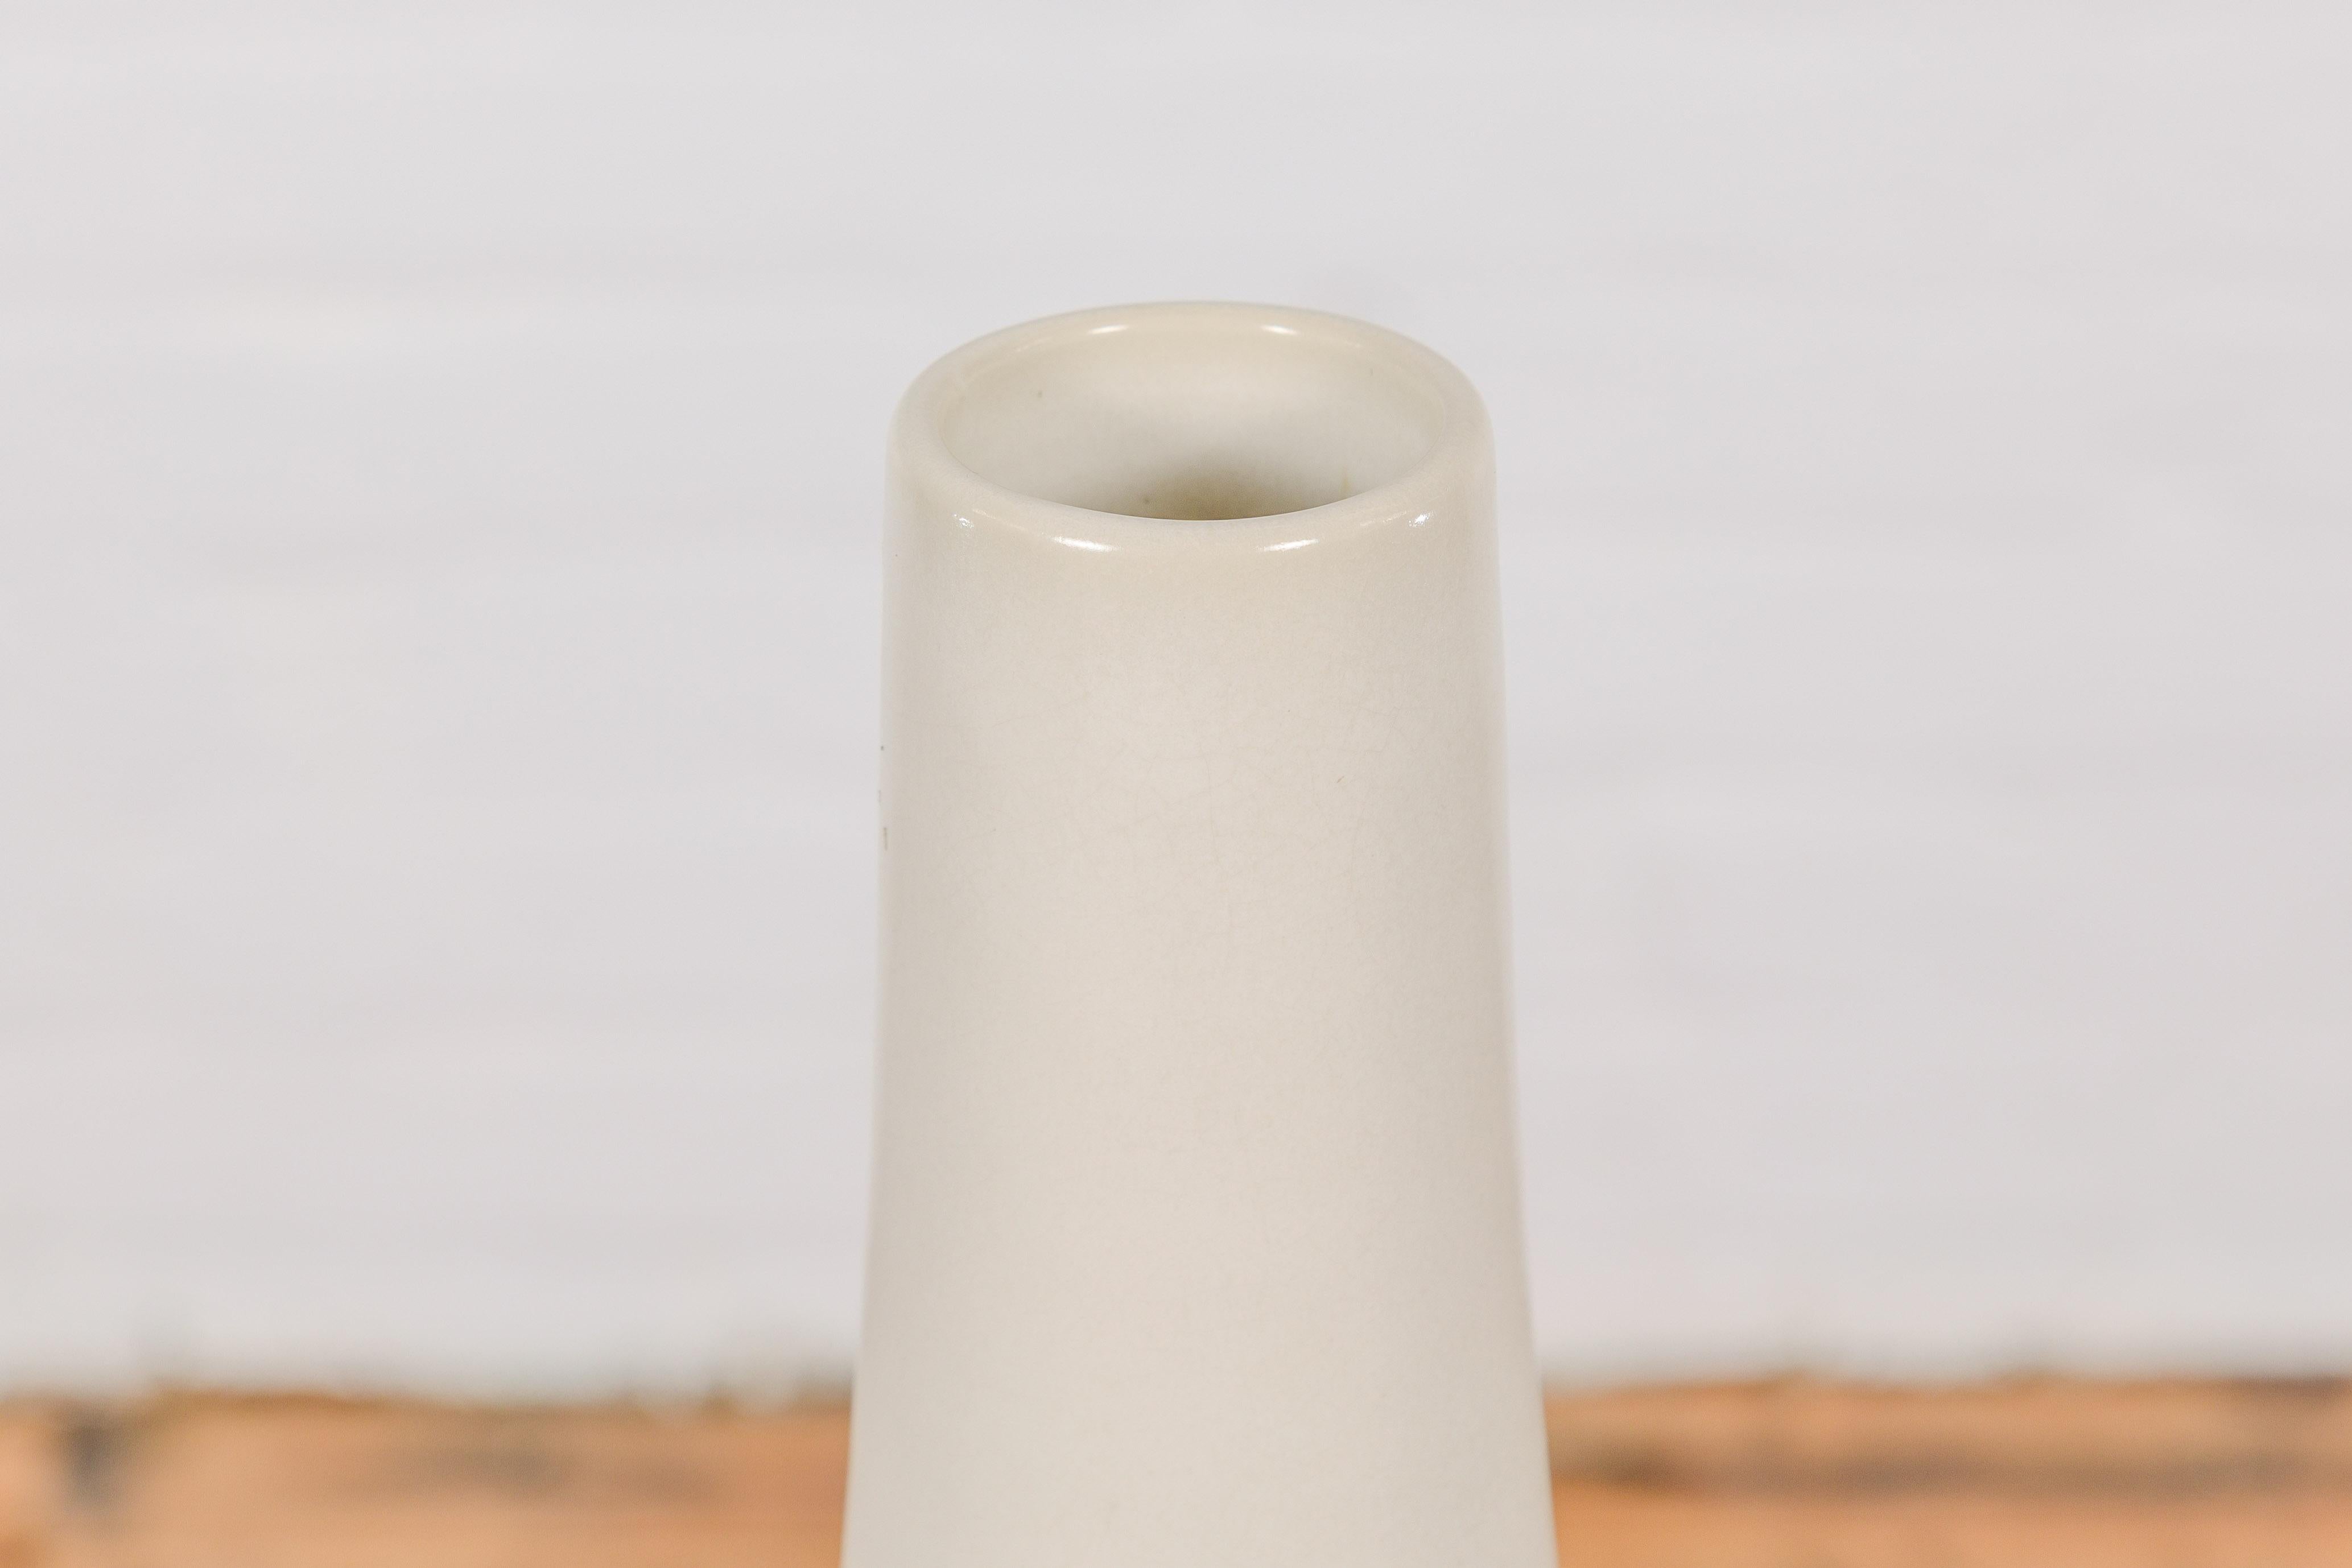 Tall Contemporary Artisan-Made Vase with Cream Glaze and Slender Silhouette For Sale 3